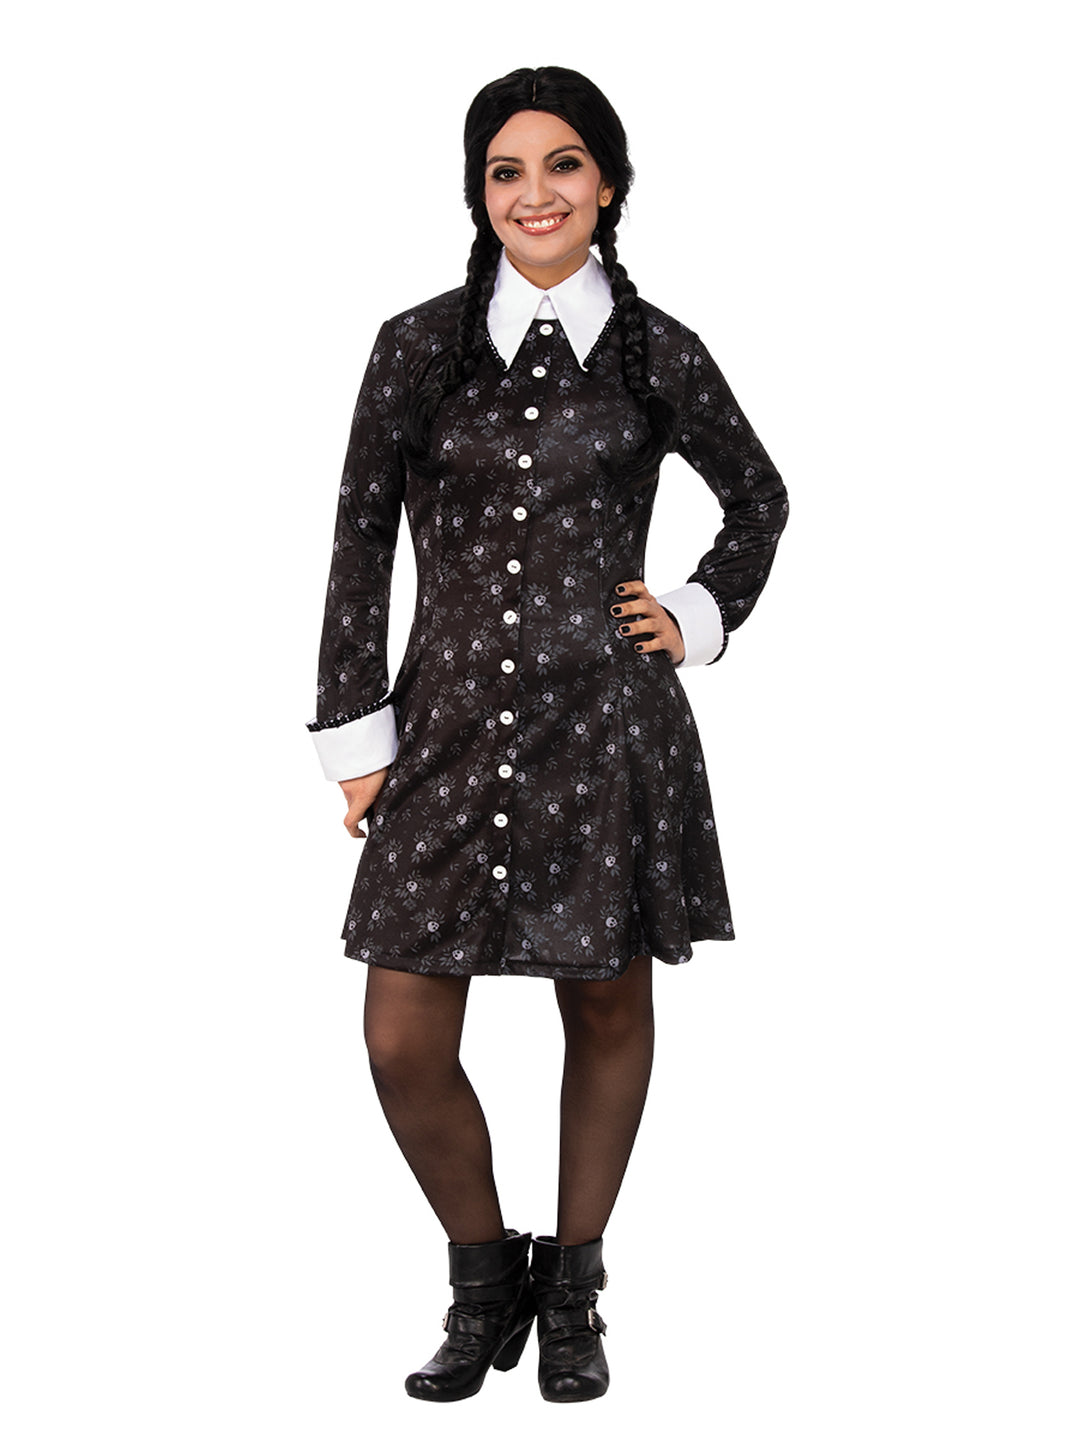 The Addams Family Licensed Wednesday Addams Ladies Costume